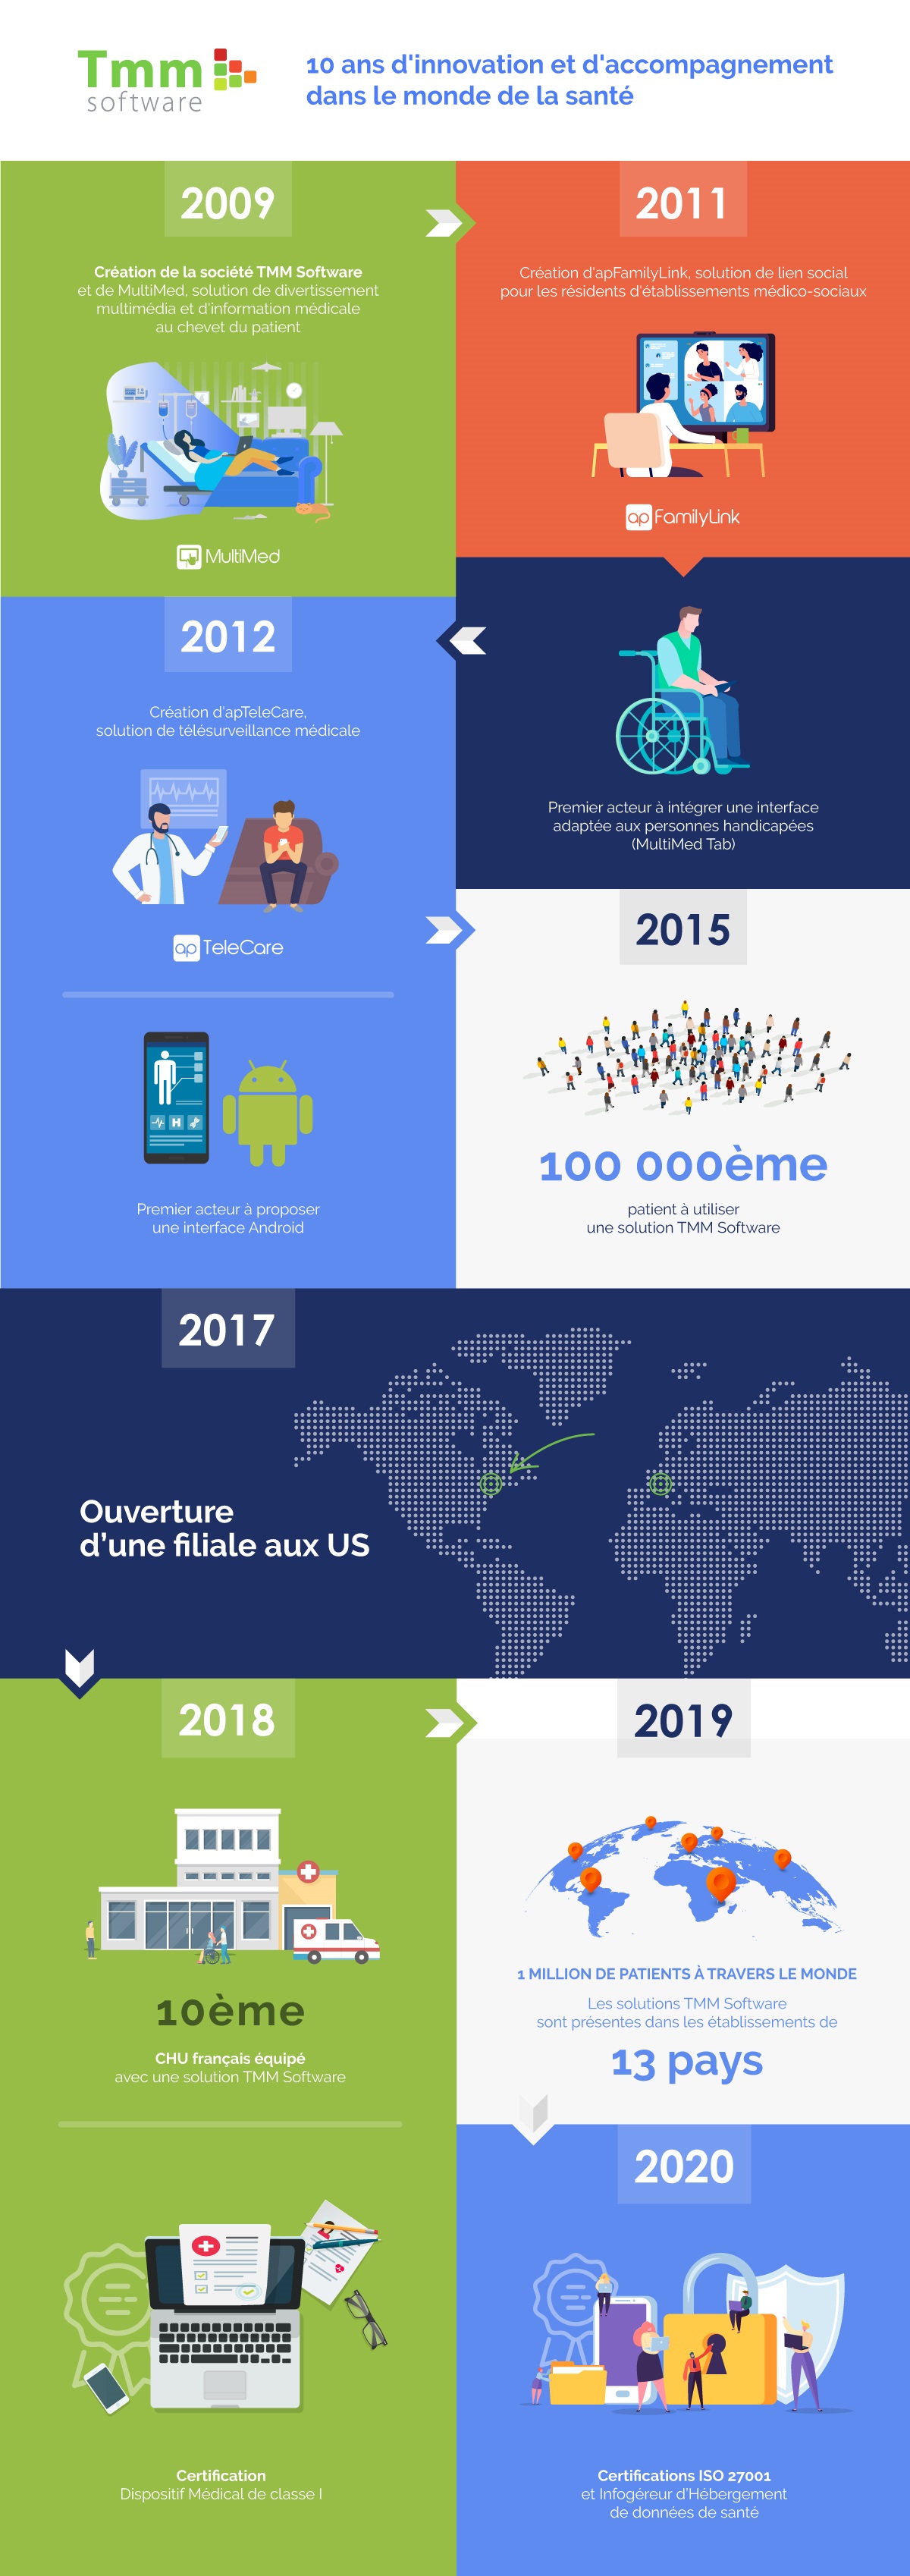 infographie tmm software 10 ans